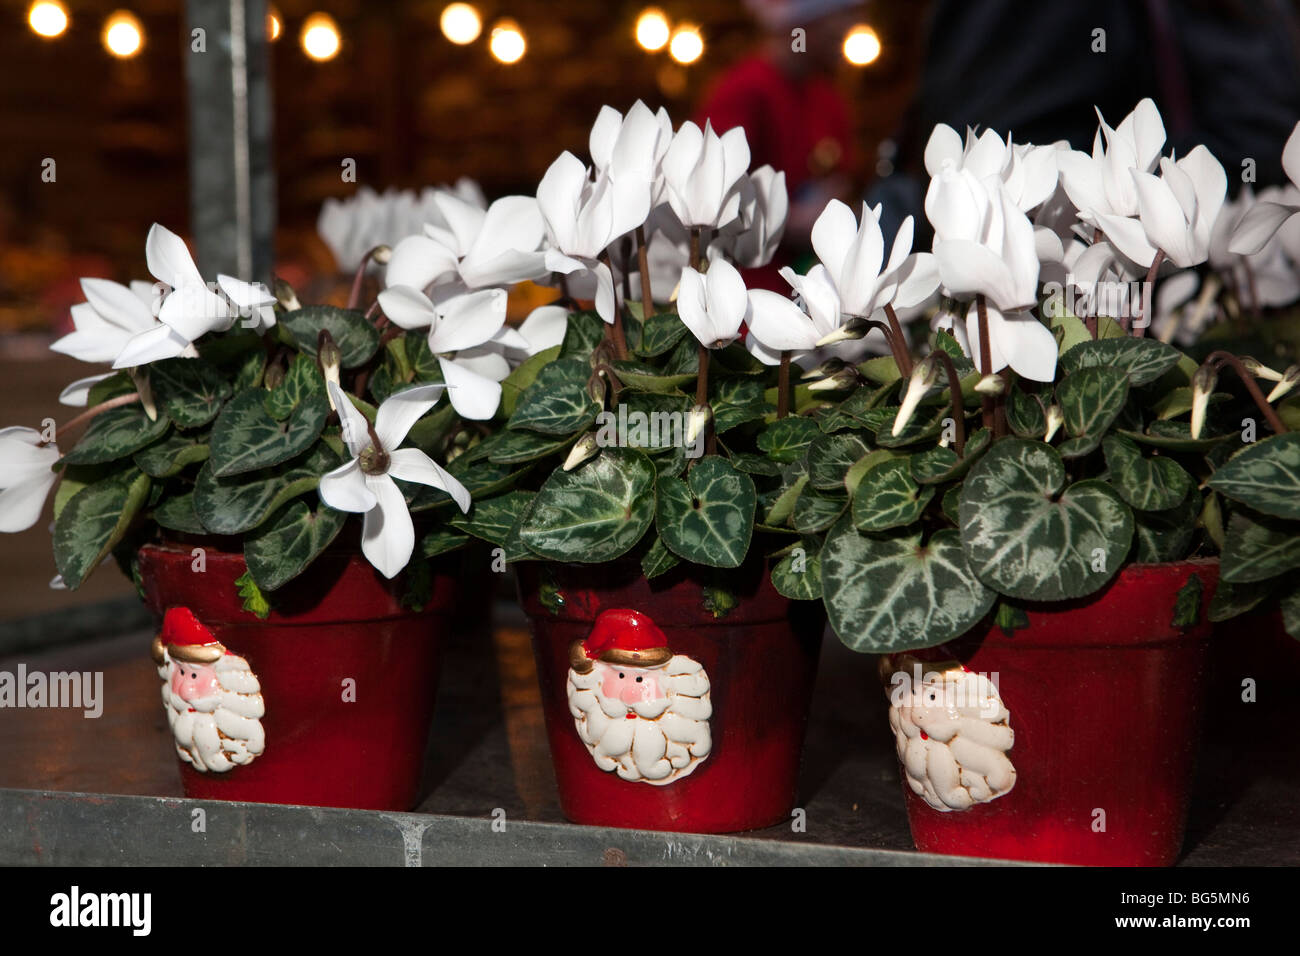 UK, England, Manchester, Albert Square, Continental market white cyclamen plants for sale in santa face pots Stock Photo